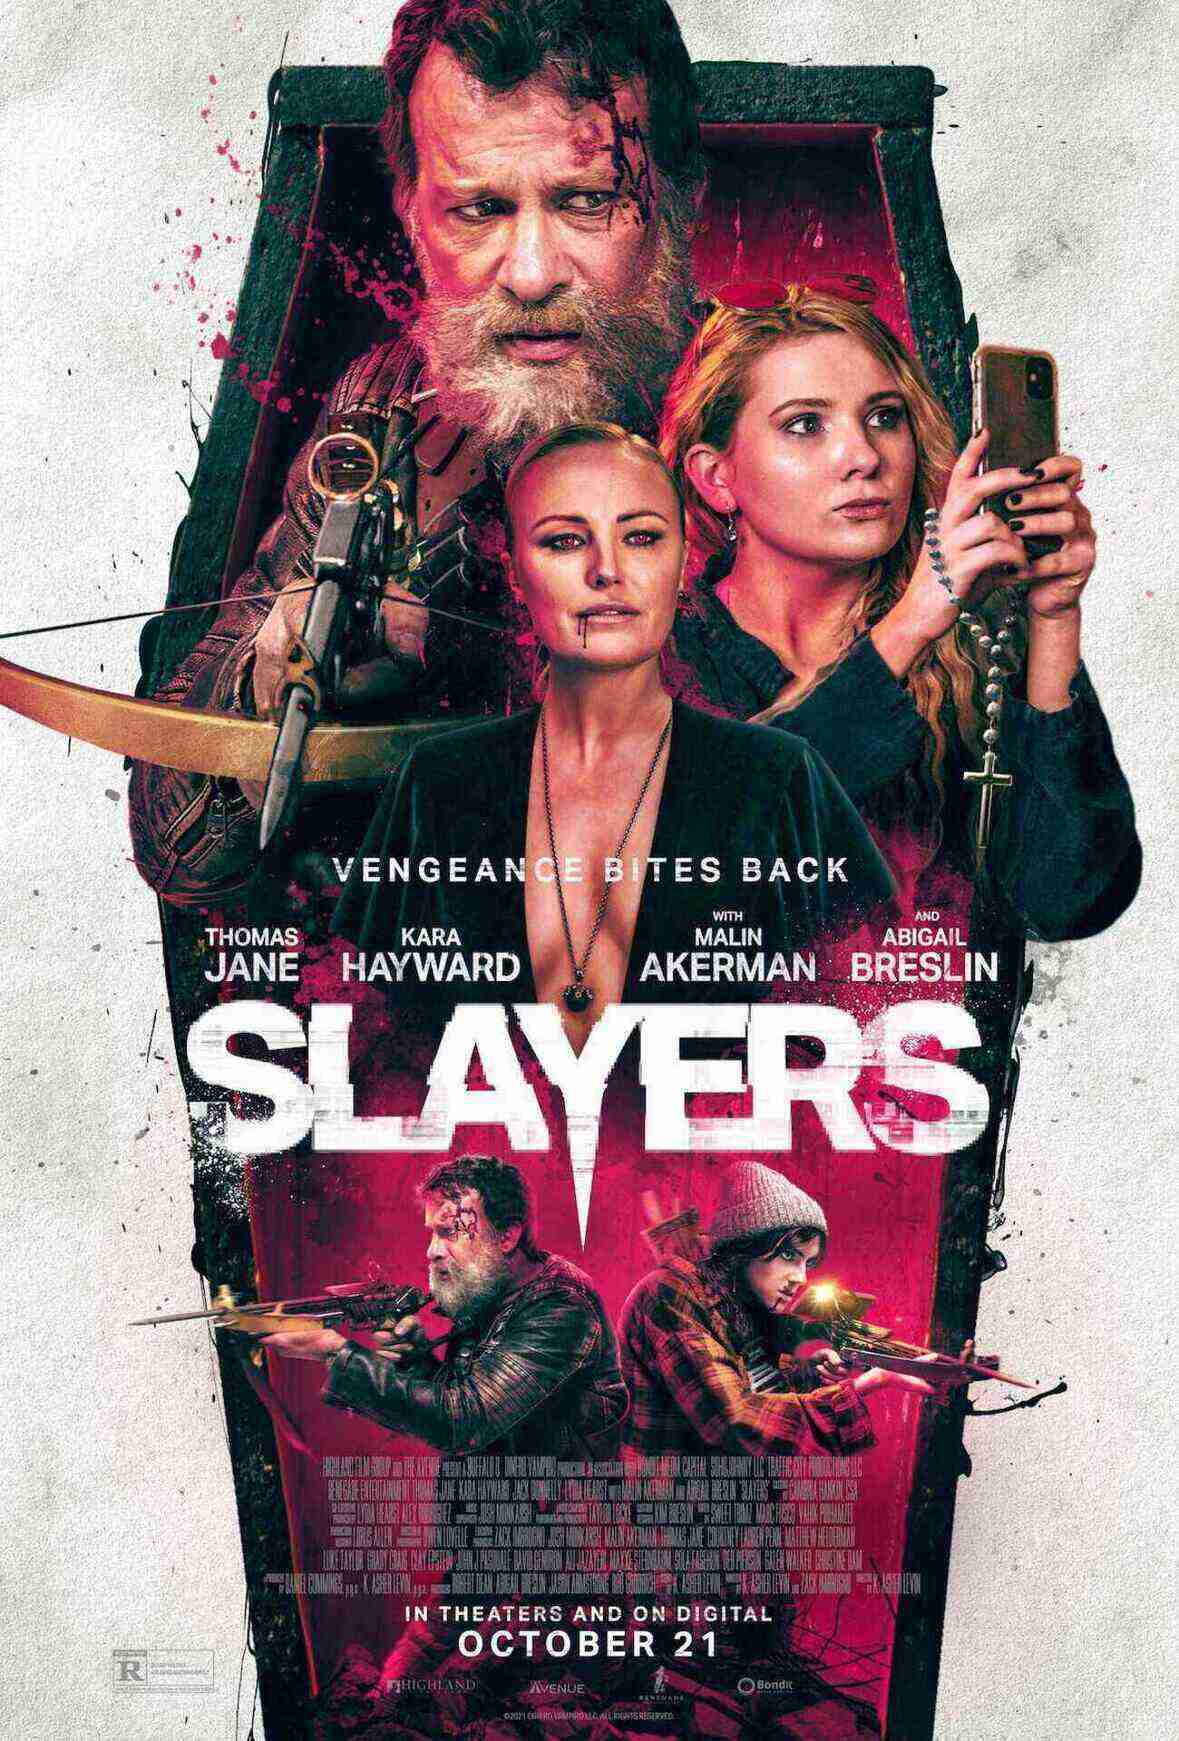 Theatrical poster for Slayers. Image courtesy of The Avenue.